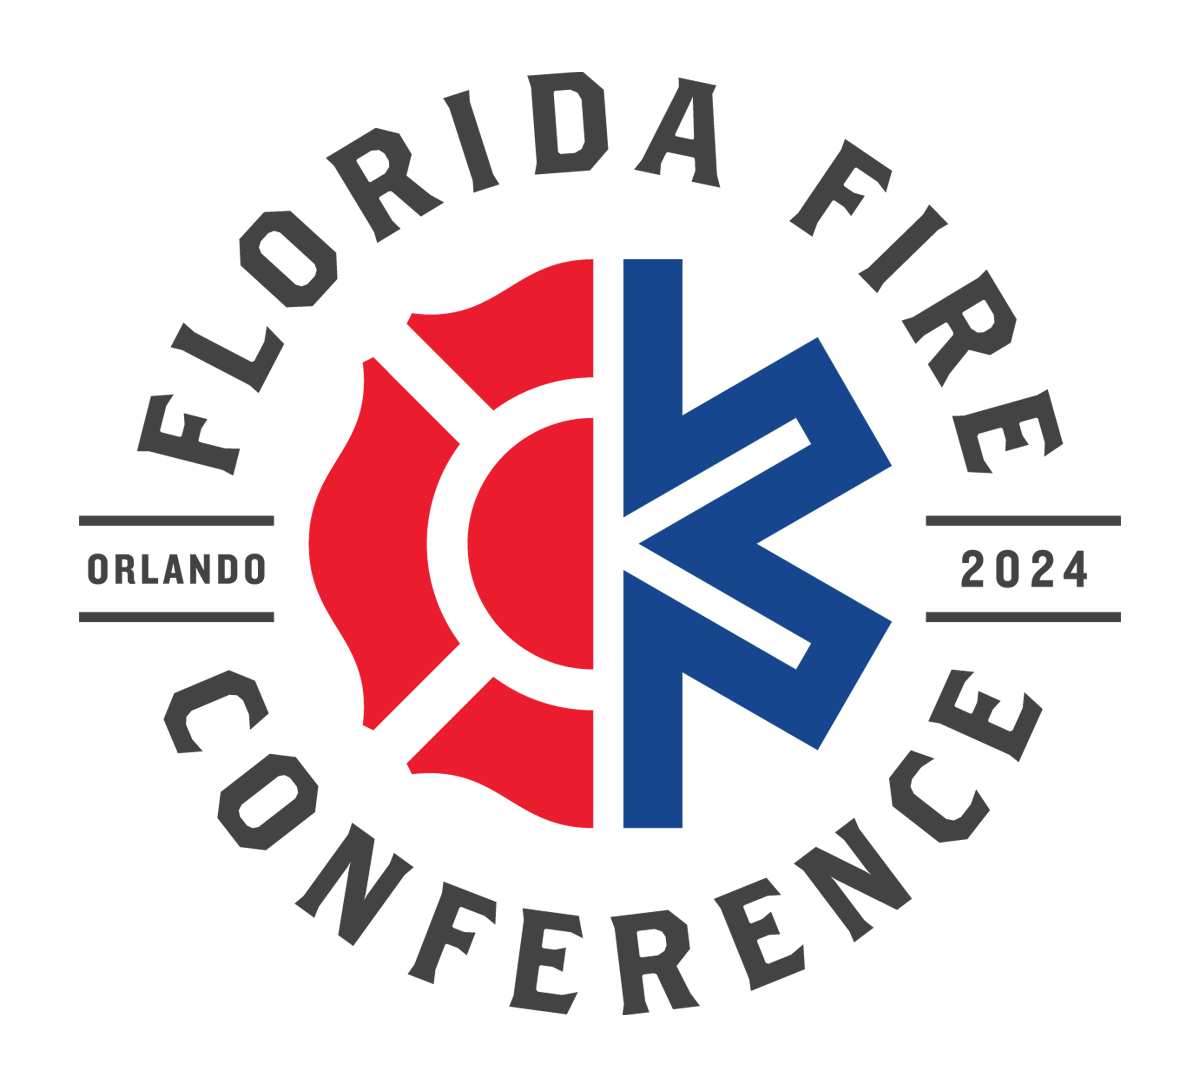 The Florida Fire Conference